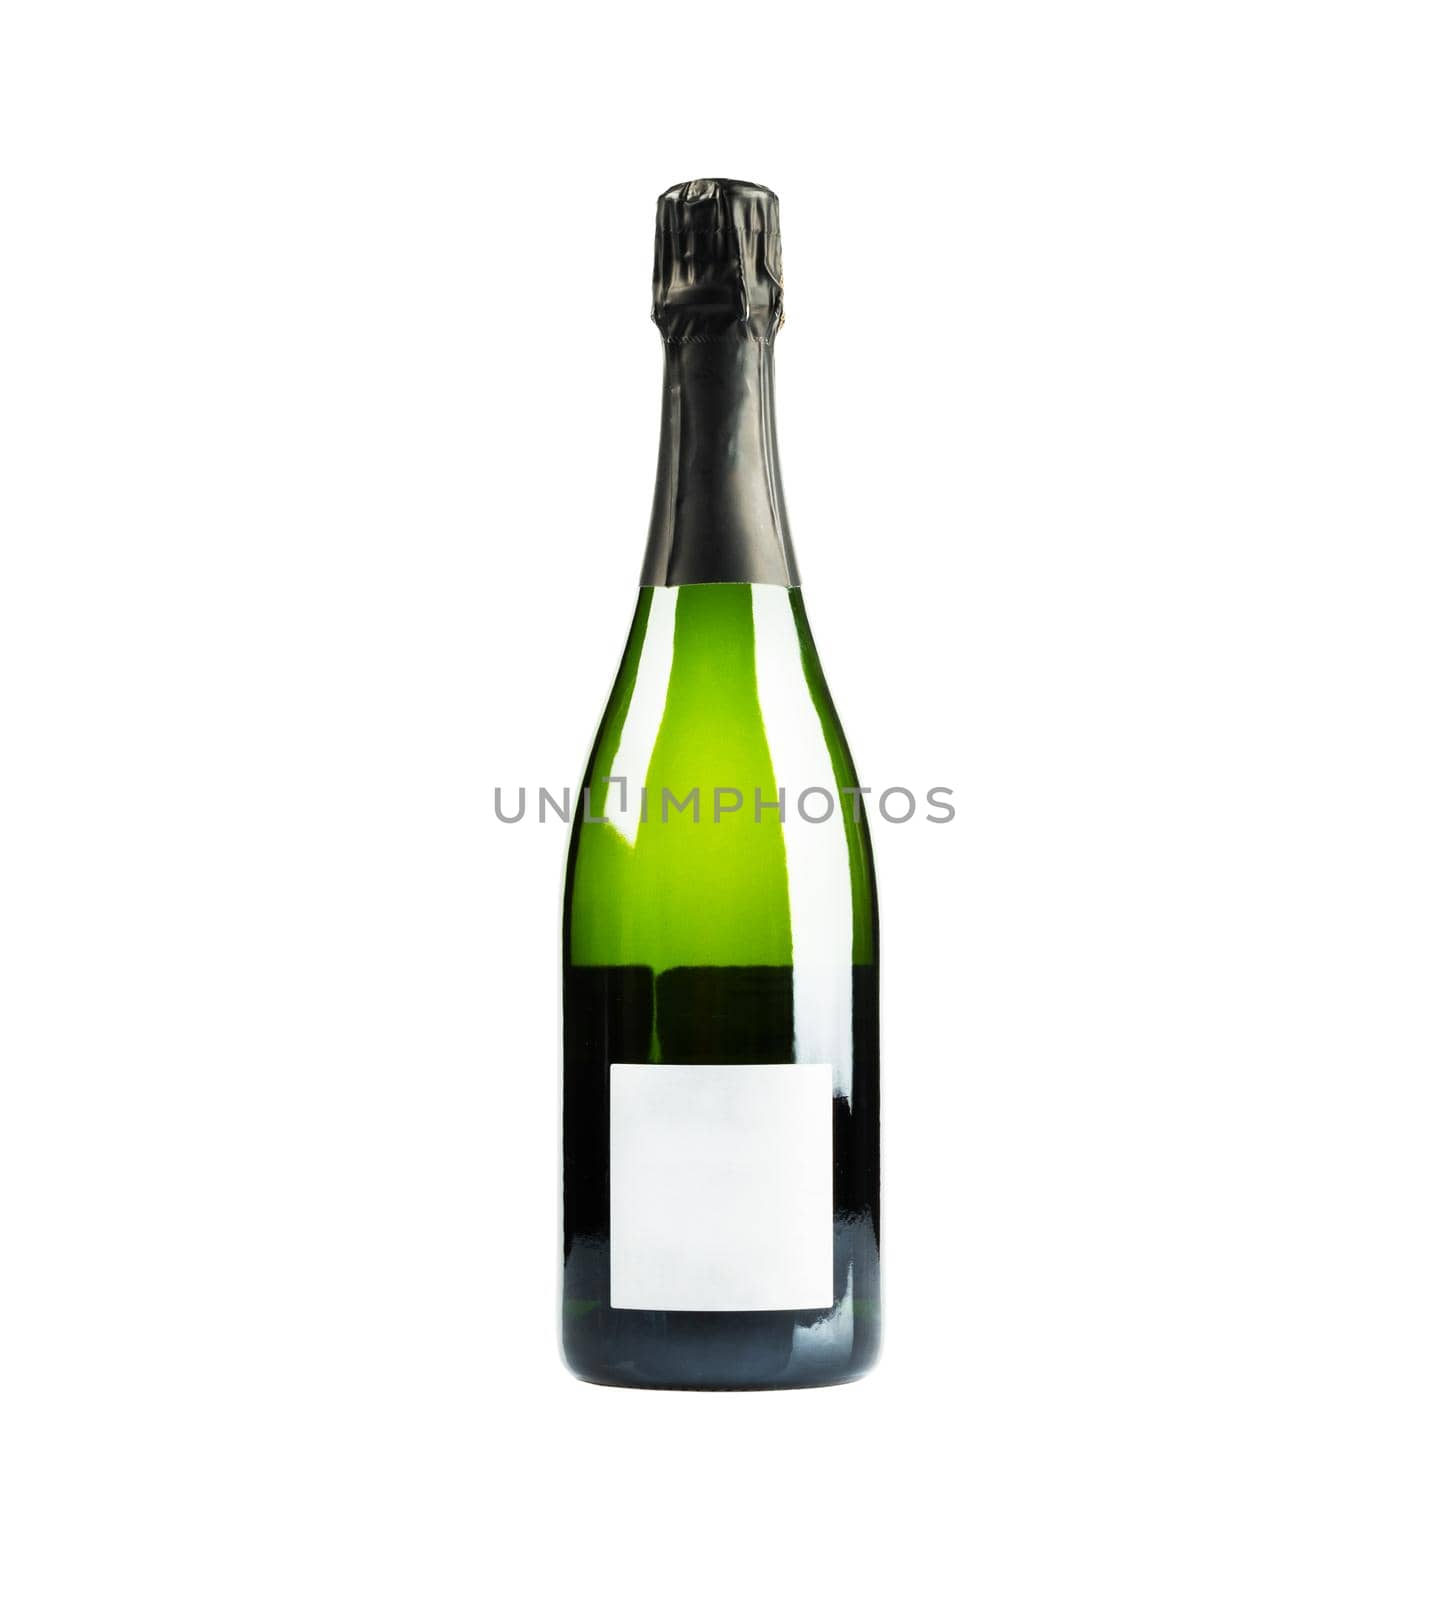 Champagne bottle with blank label by nikitabuida